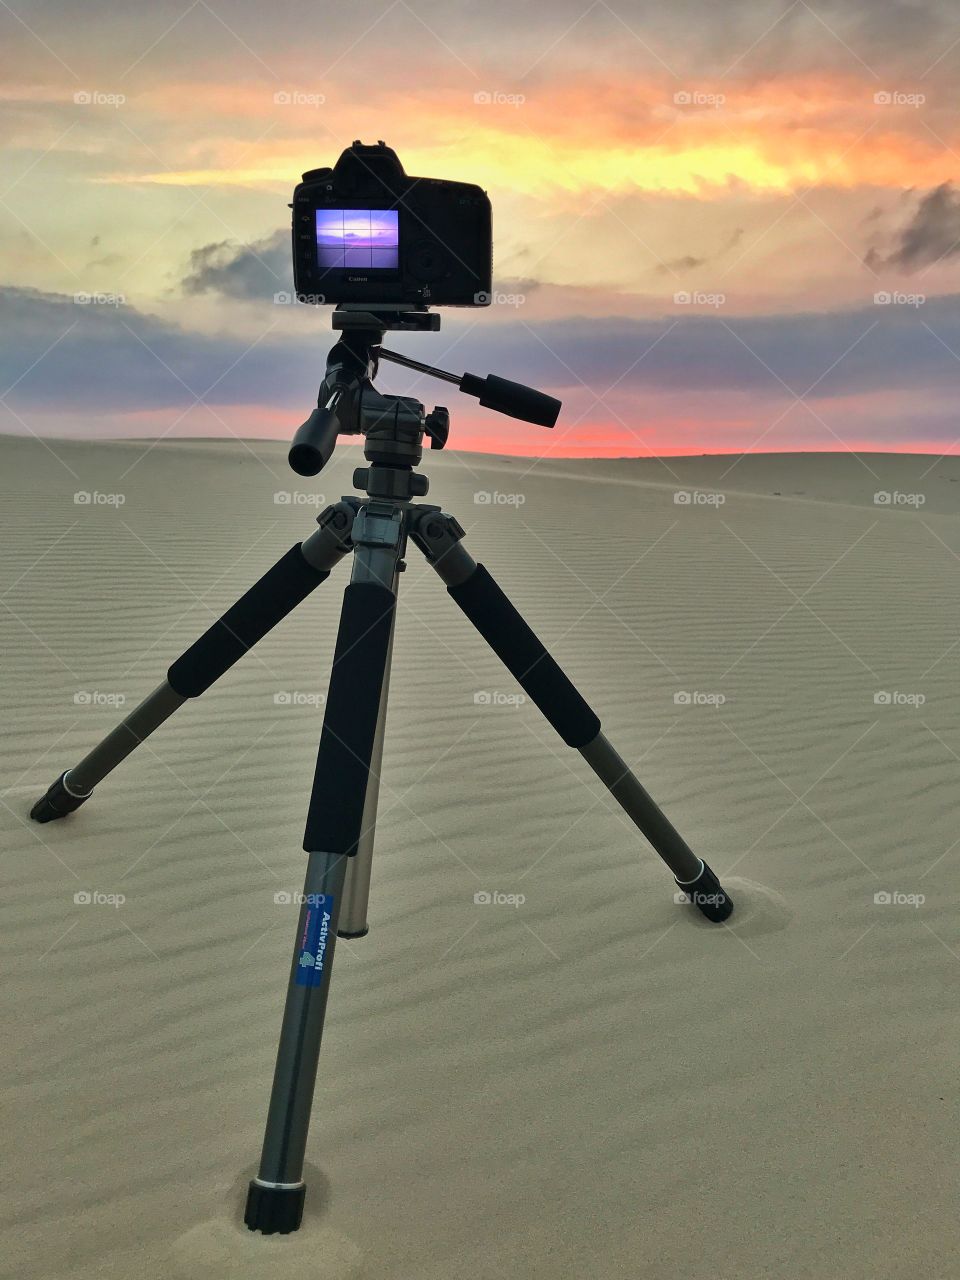 A beautiful warm summernight for taking photos. Warm sand and a lovely colorful sky